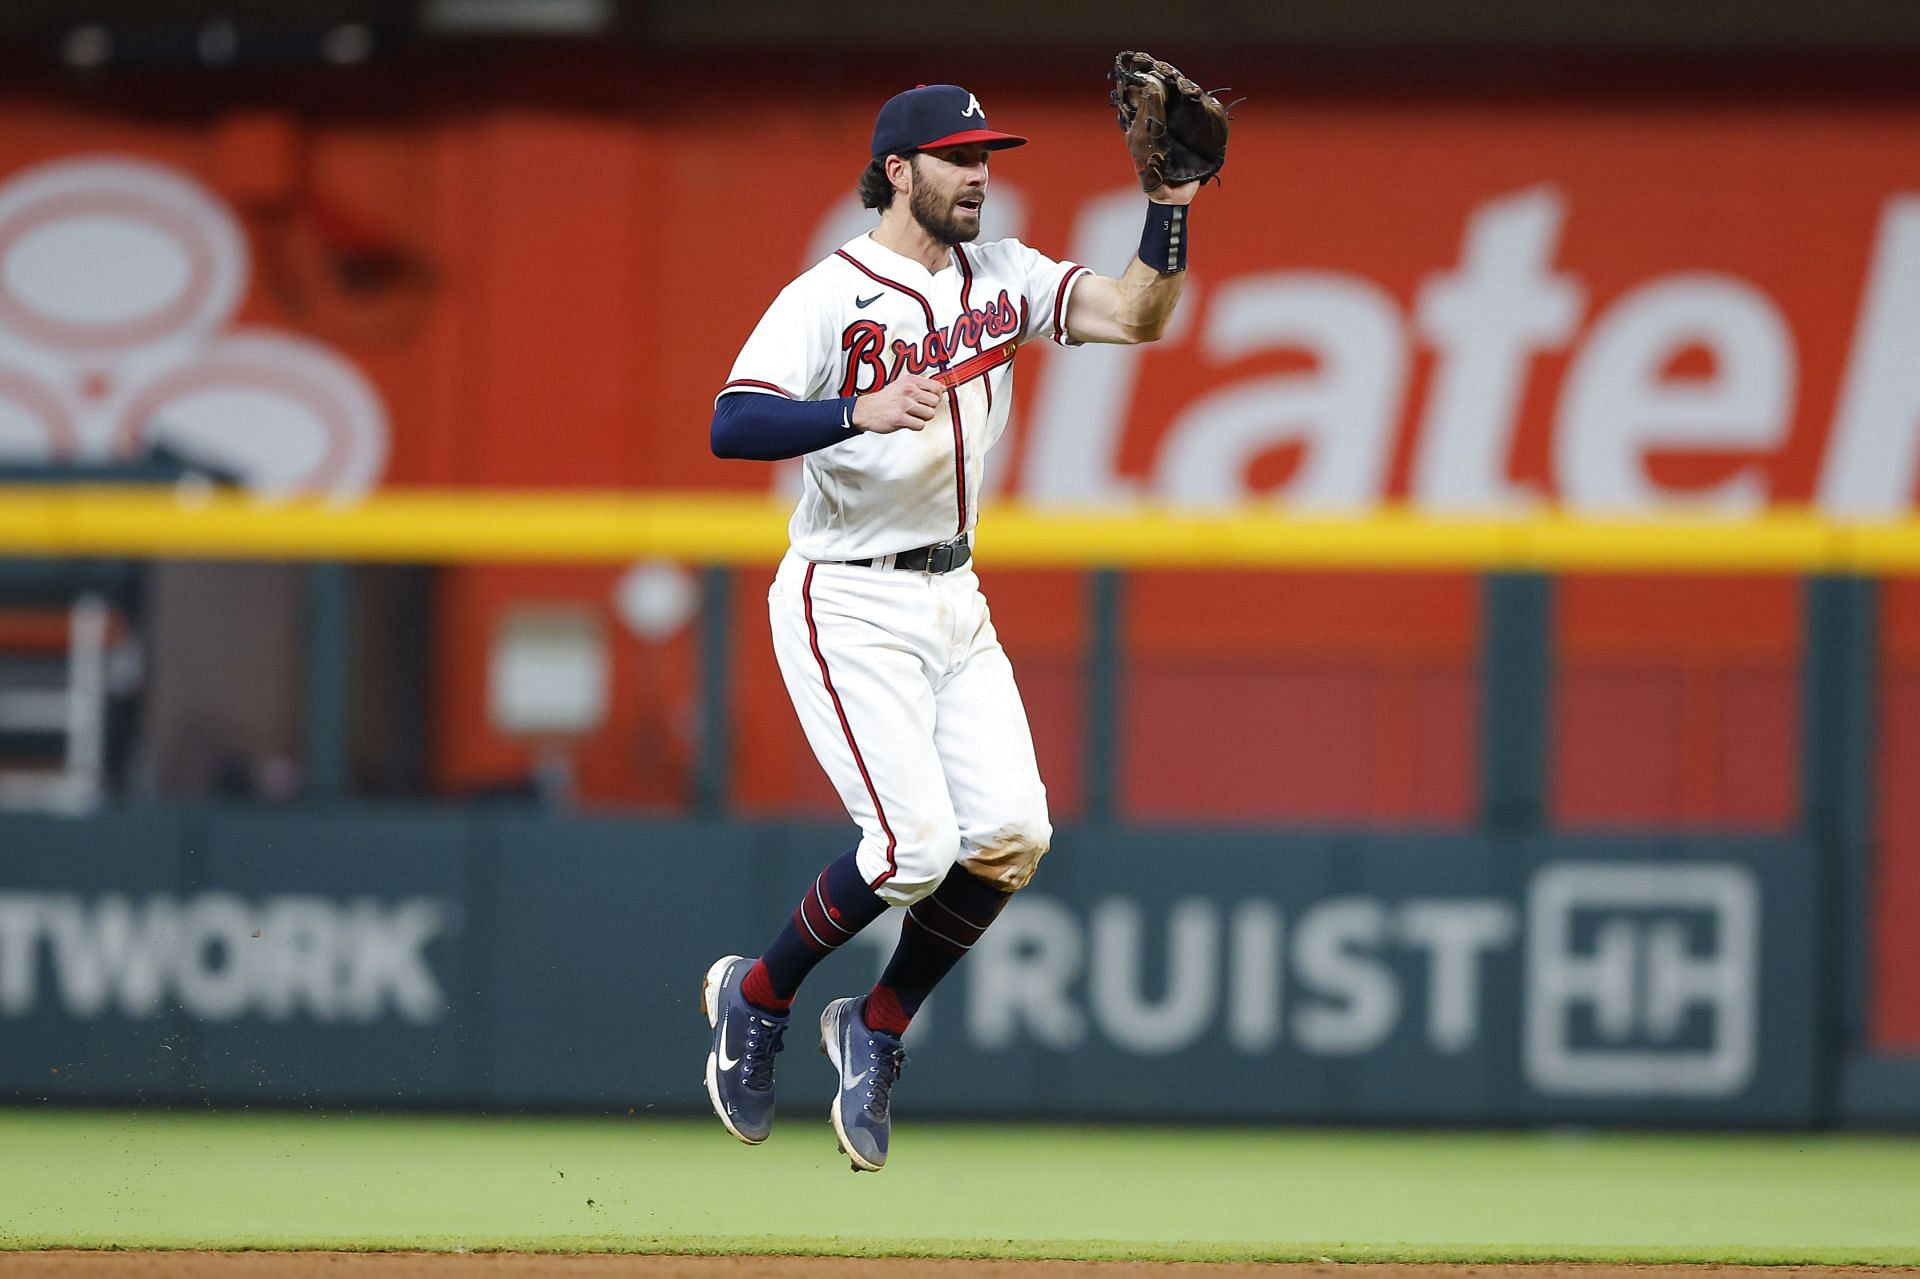 Colorado's Mallory Pugh takes on Braves' Dansby Swanson to see who's the  better athlete